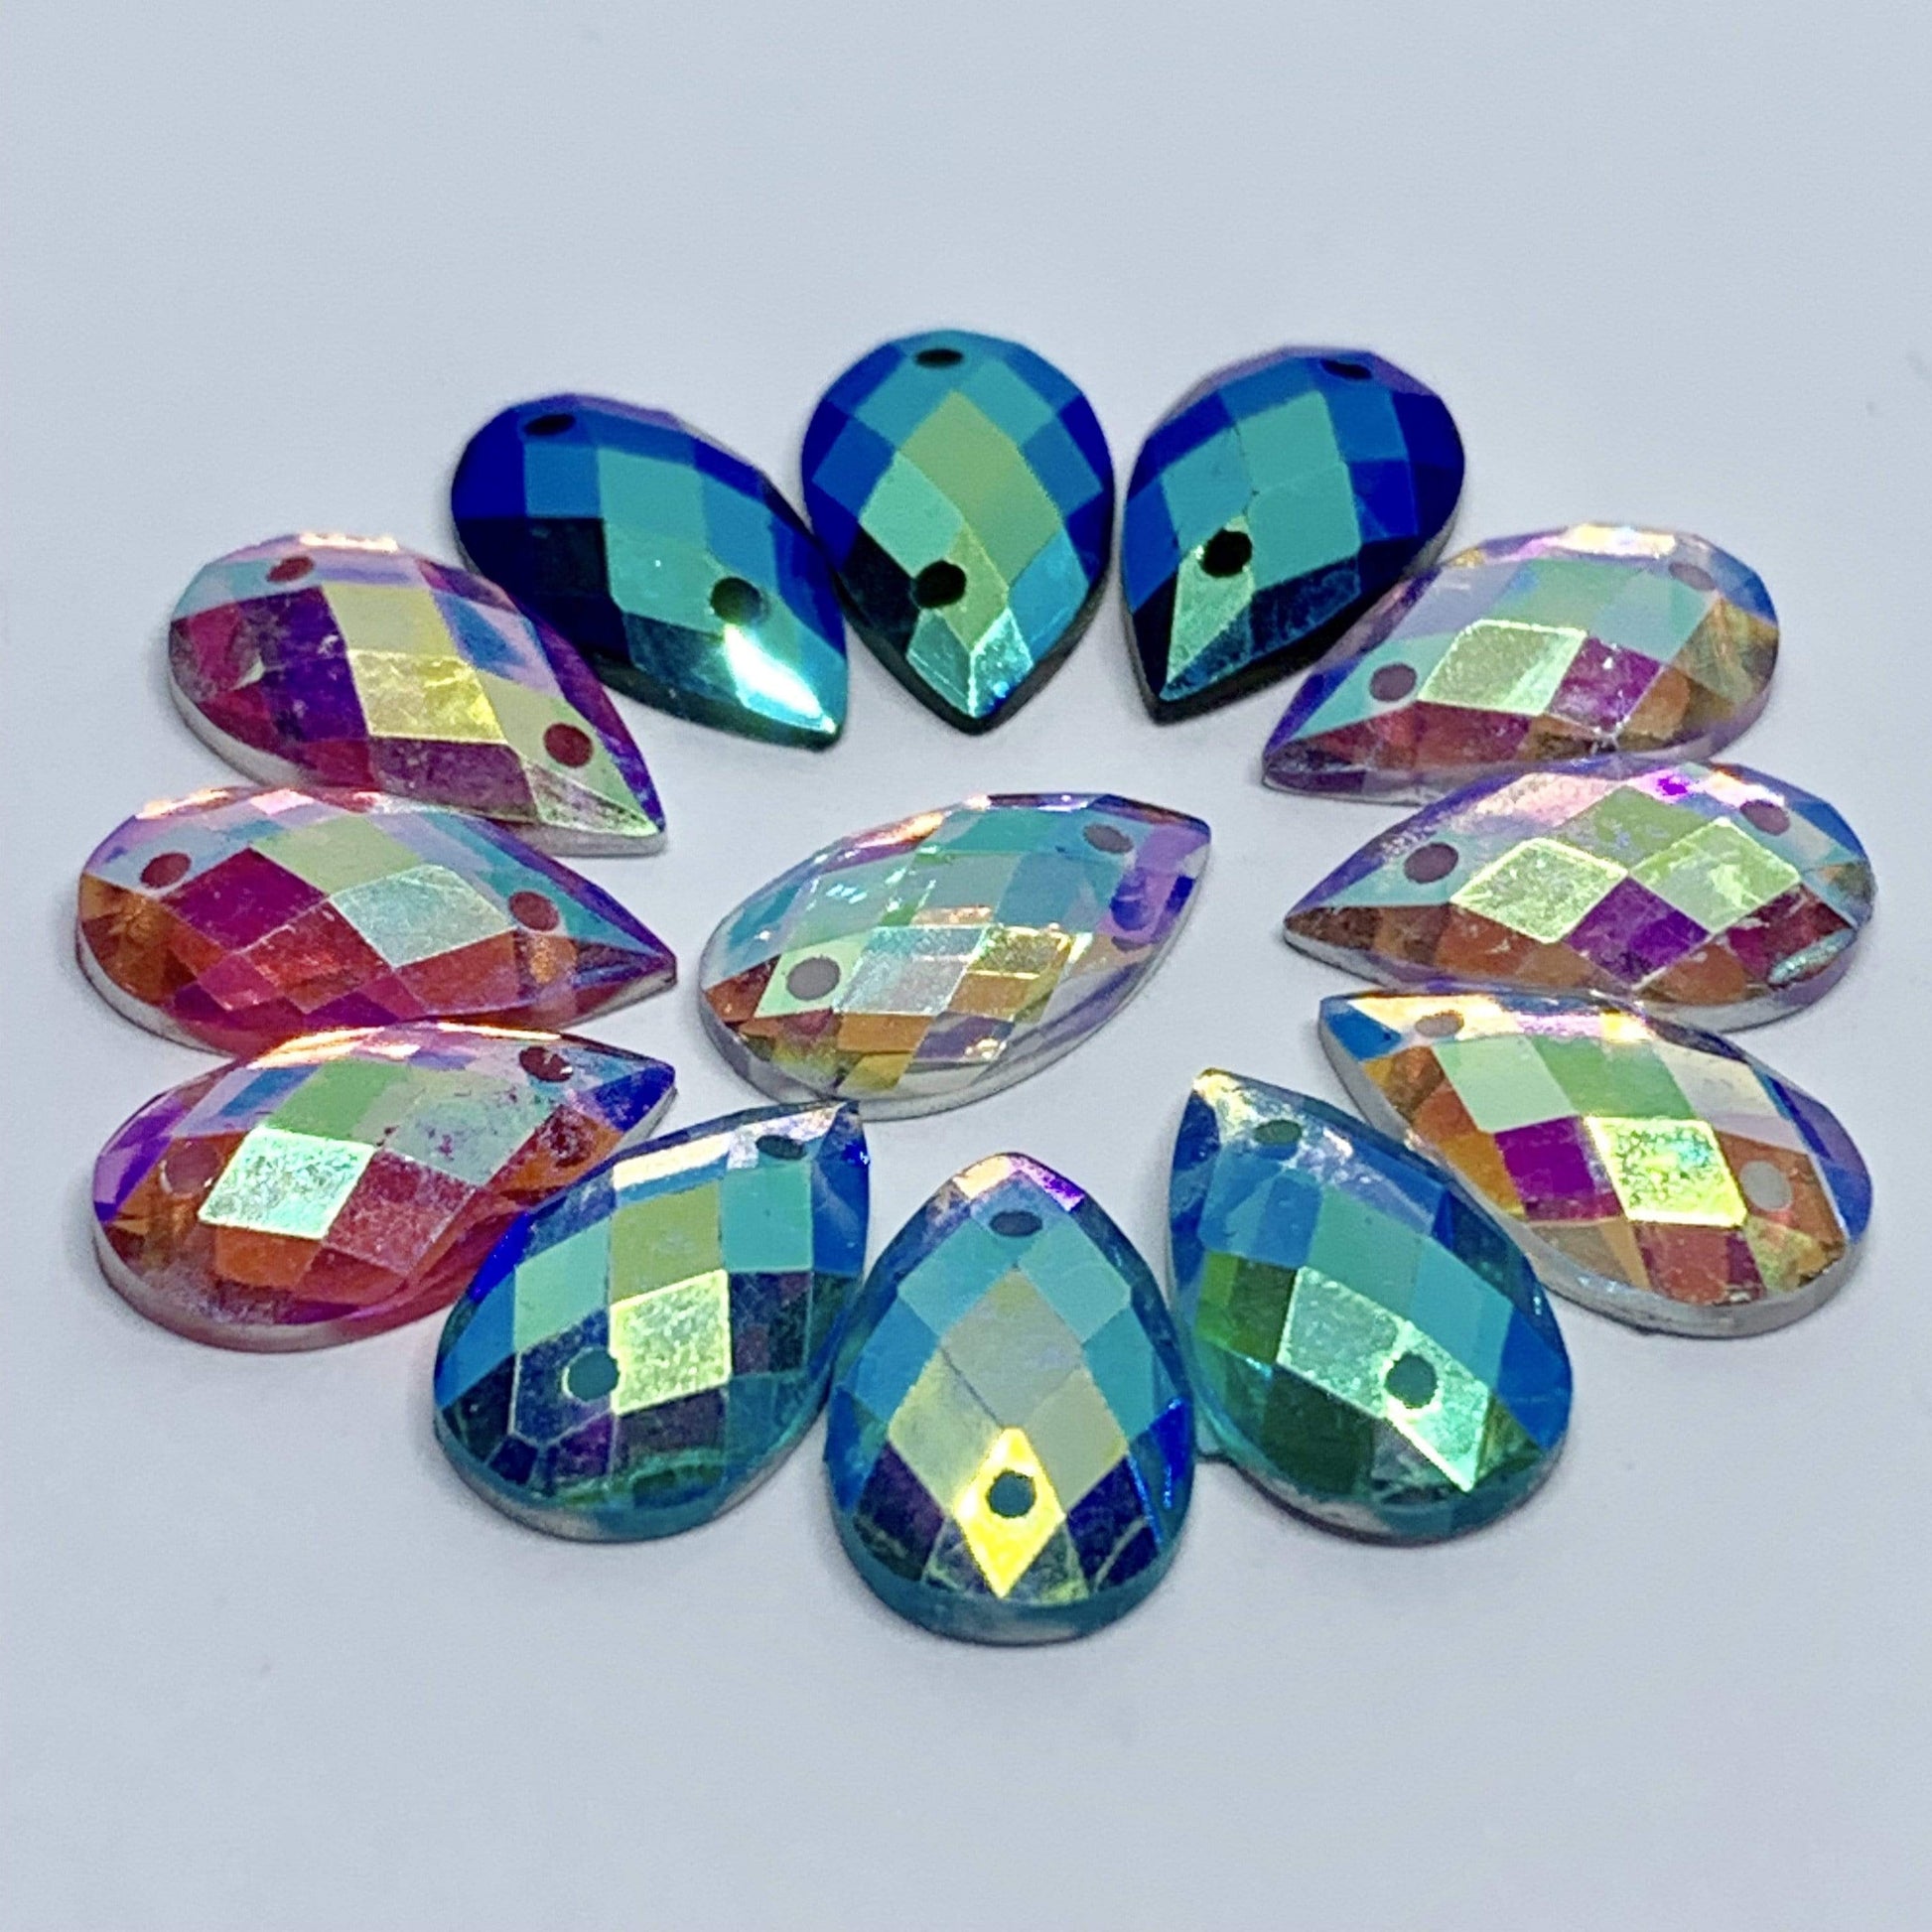 Sundaylace Creations & Bling Resin Gems 7*12mm Muli-colour Checkered pattern, Teardrops, Sew on, Resin Gem